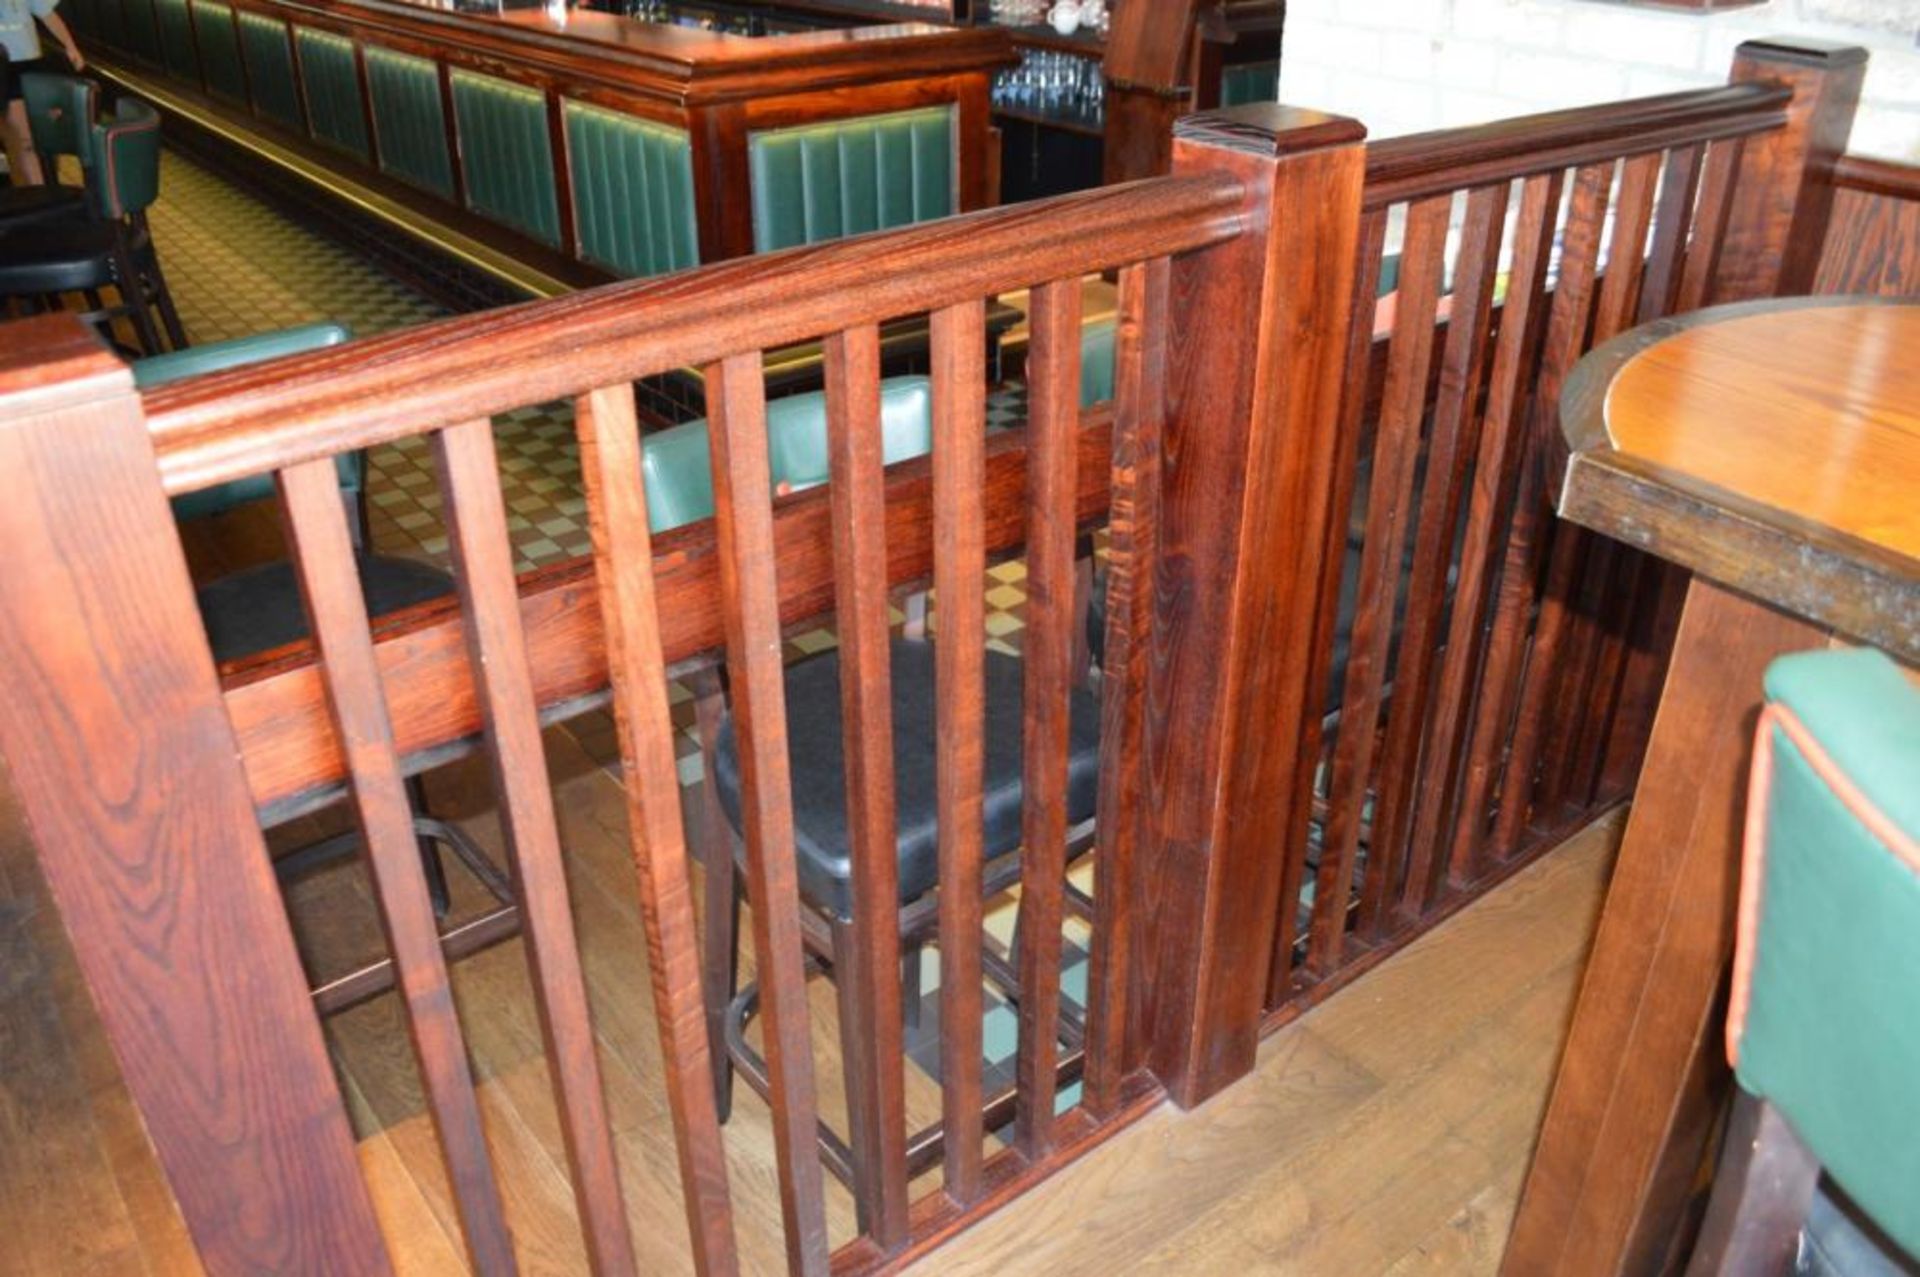 2 x Post Rail Dividers With Seating Bench and Brass Hand Rail - Mahogany Finish - H117 x W141cms - Image 4 of 6